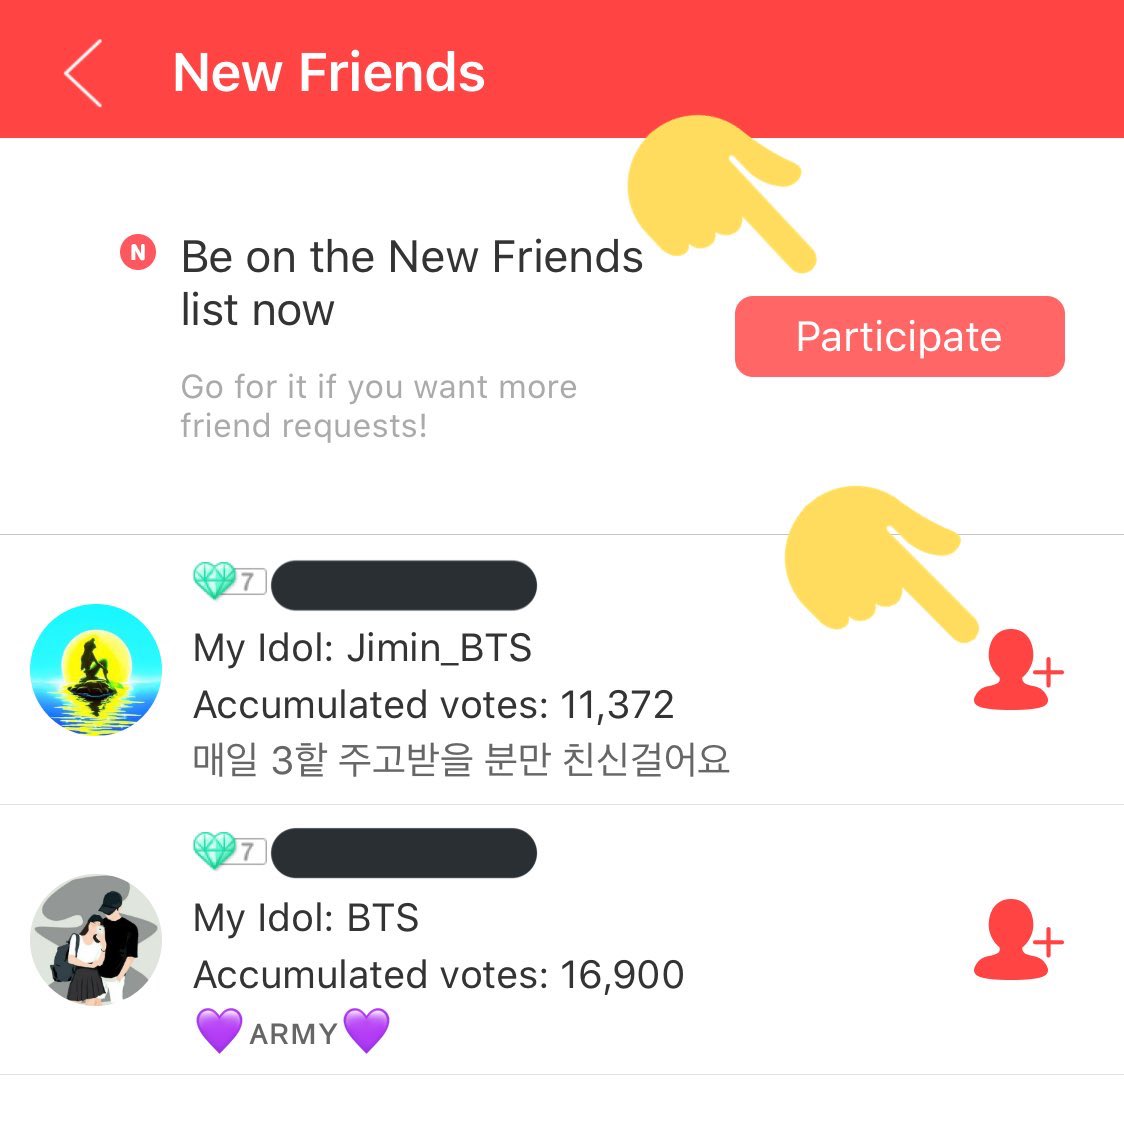  You have several options to add friends New friends listgo to “Friends”click the left button on the topclick “participate”add friends from the new friends list @BTS_twt